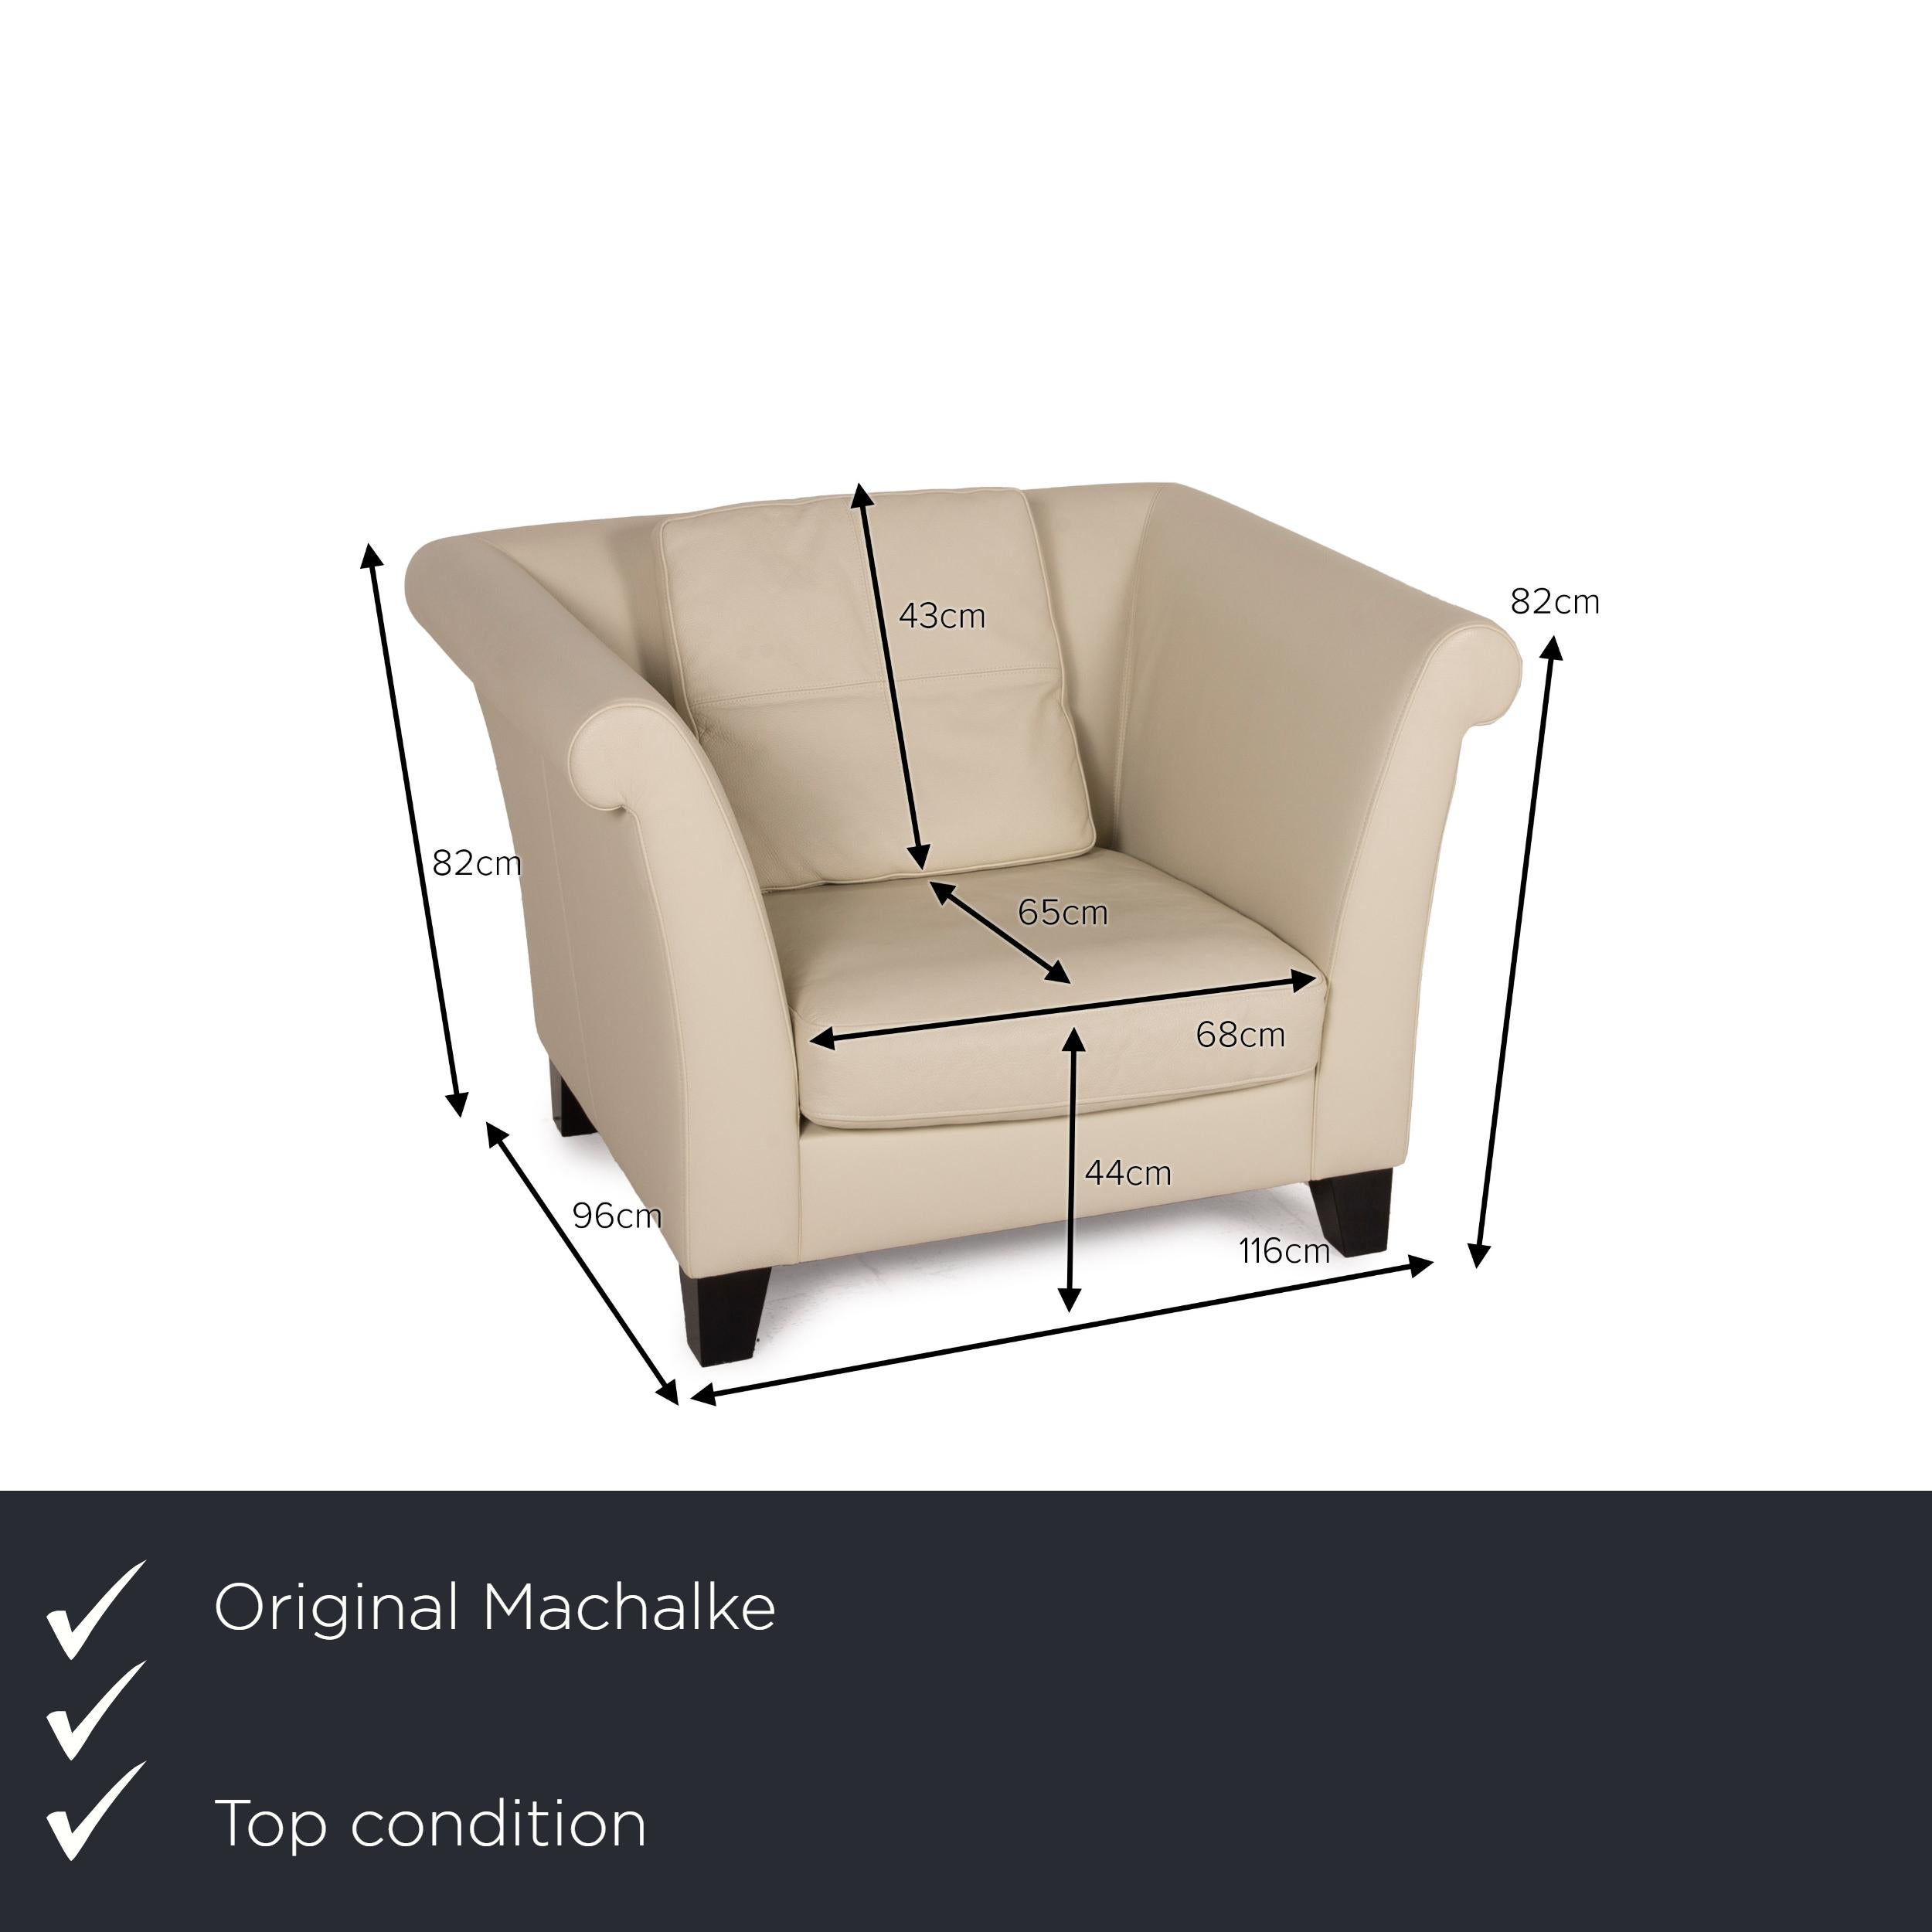 We present to you a Machalke leather armchair cream.

Product measurements in centimeters:

Depth 98
Width 116
Height 82
Seat height 44
Rest height 82
Seat depth 65
Seat width 68
Back height 43.
 
  
 
  